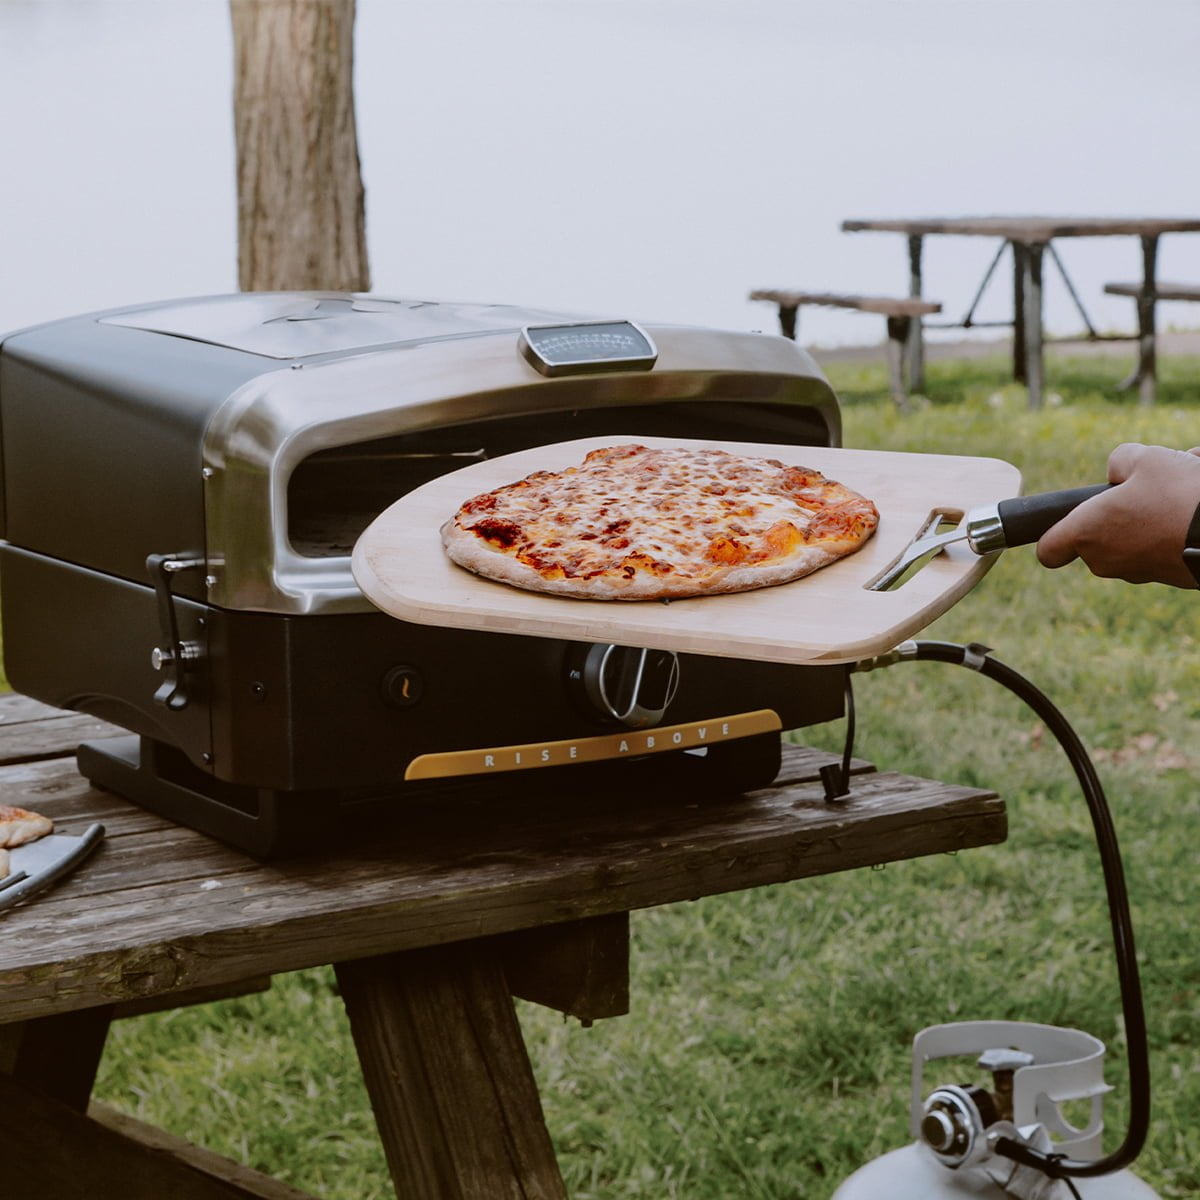 Halo Versa 16 Review: My Complete Halo Pizza Oven Review